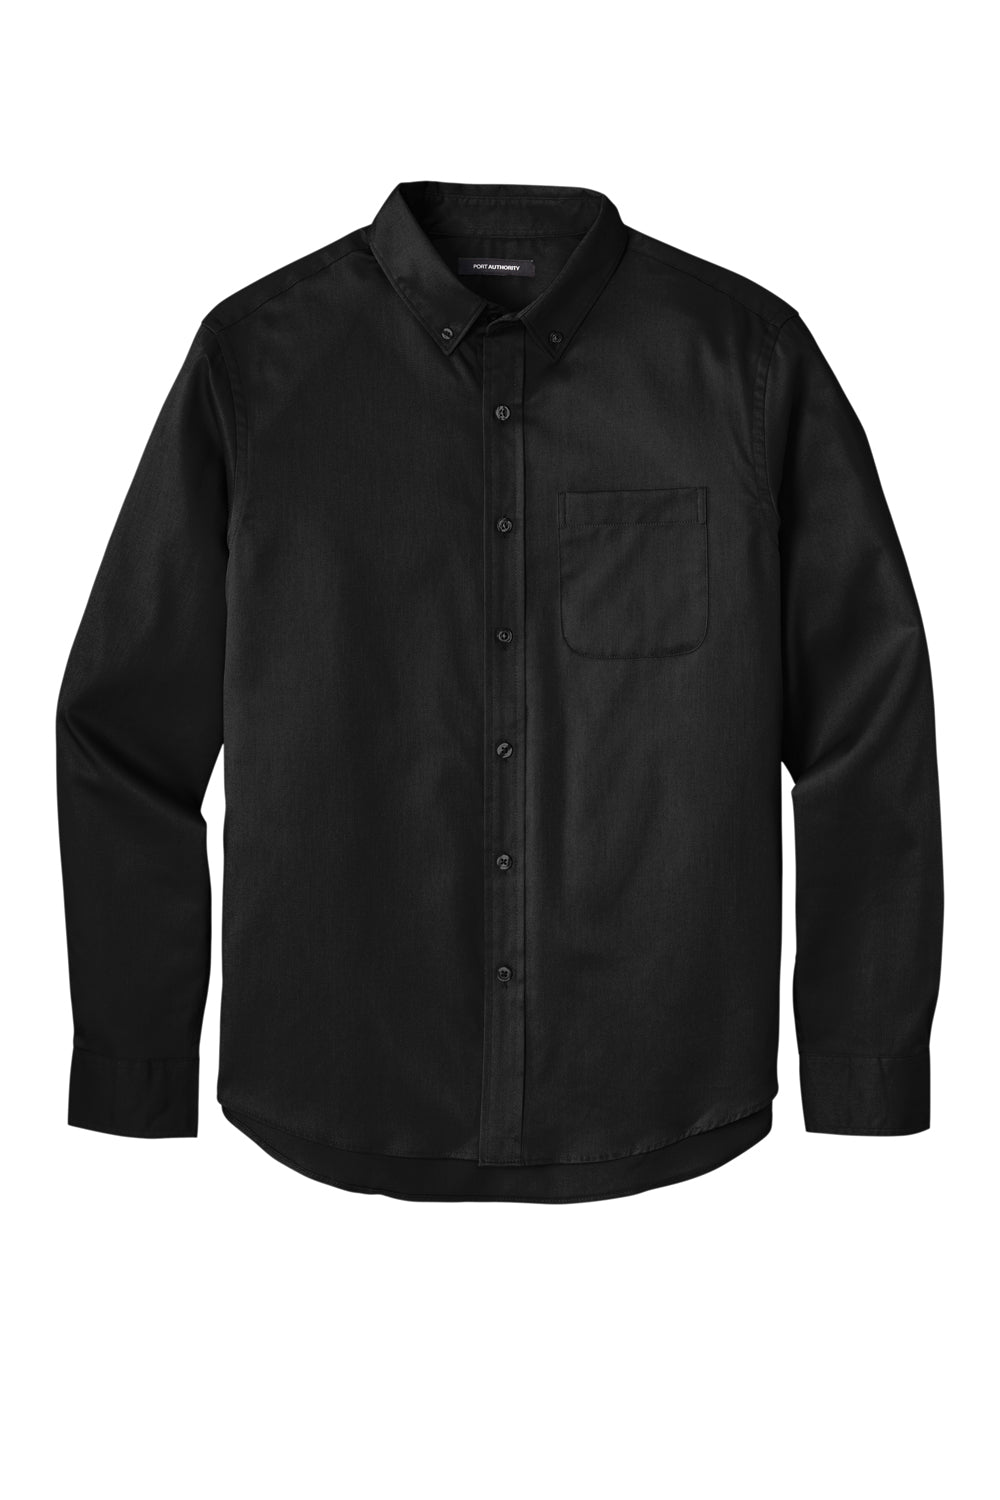 Port Authority W808 SuperPro Wrinkle Resistant React Long Sleeve Button Down Shirt w/ Pocket Deep Black Flat Front